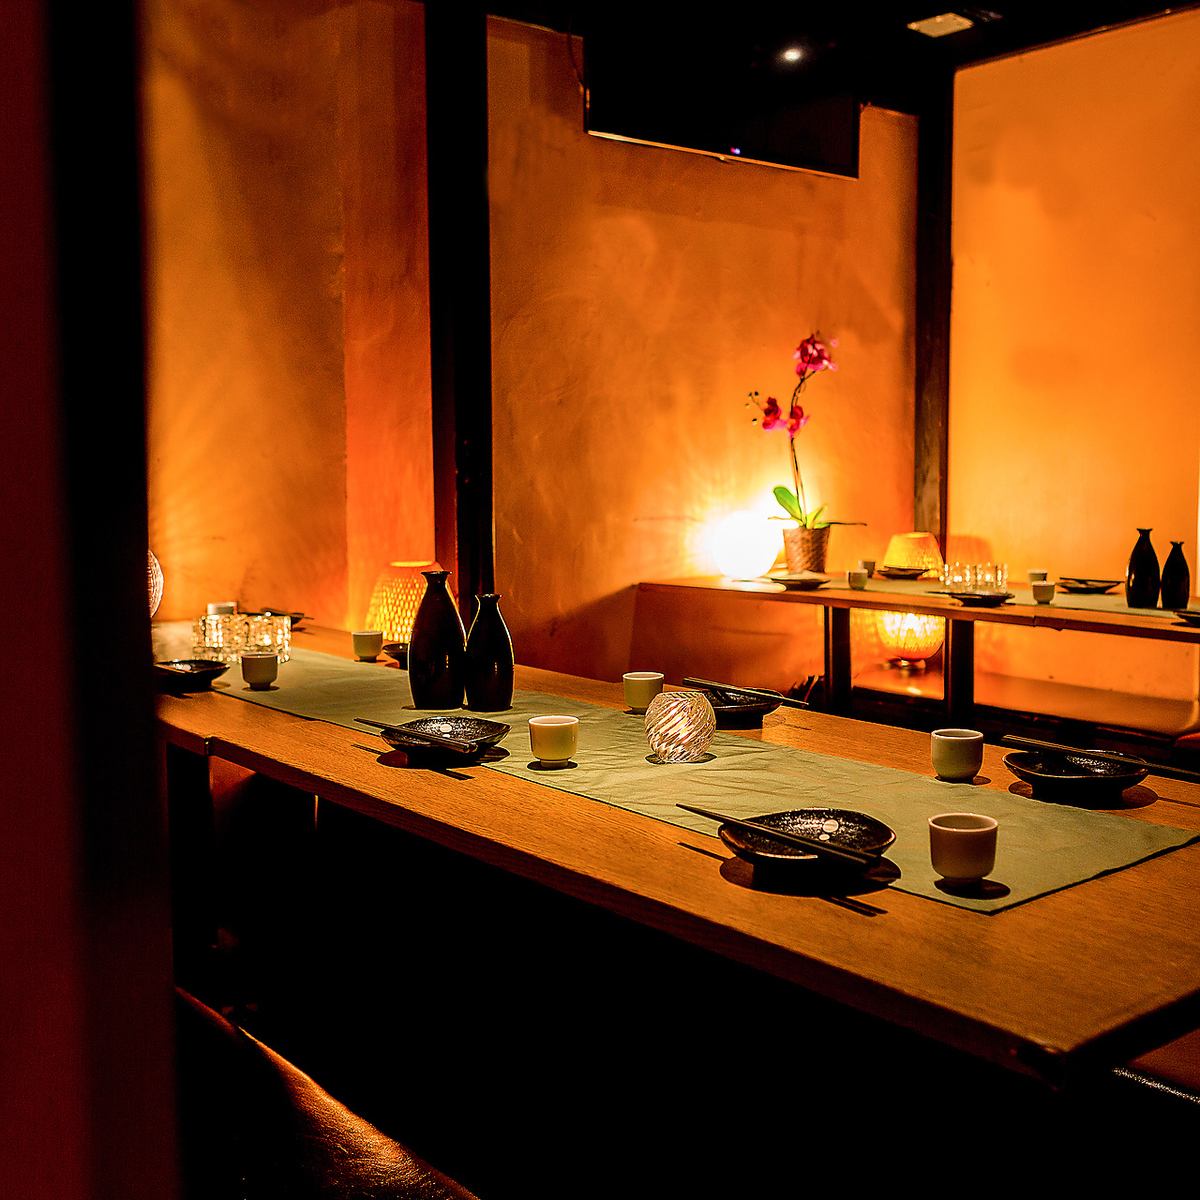 We have private rooms where you can relax for more than 3 hours.Free Yakitori!